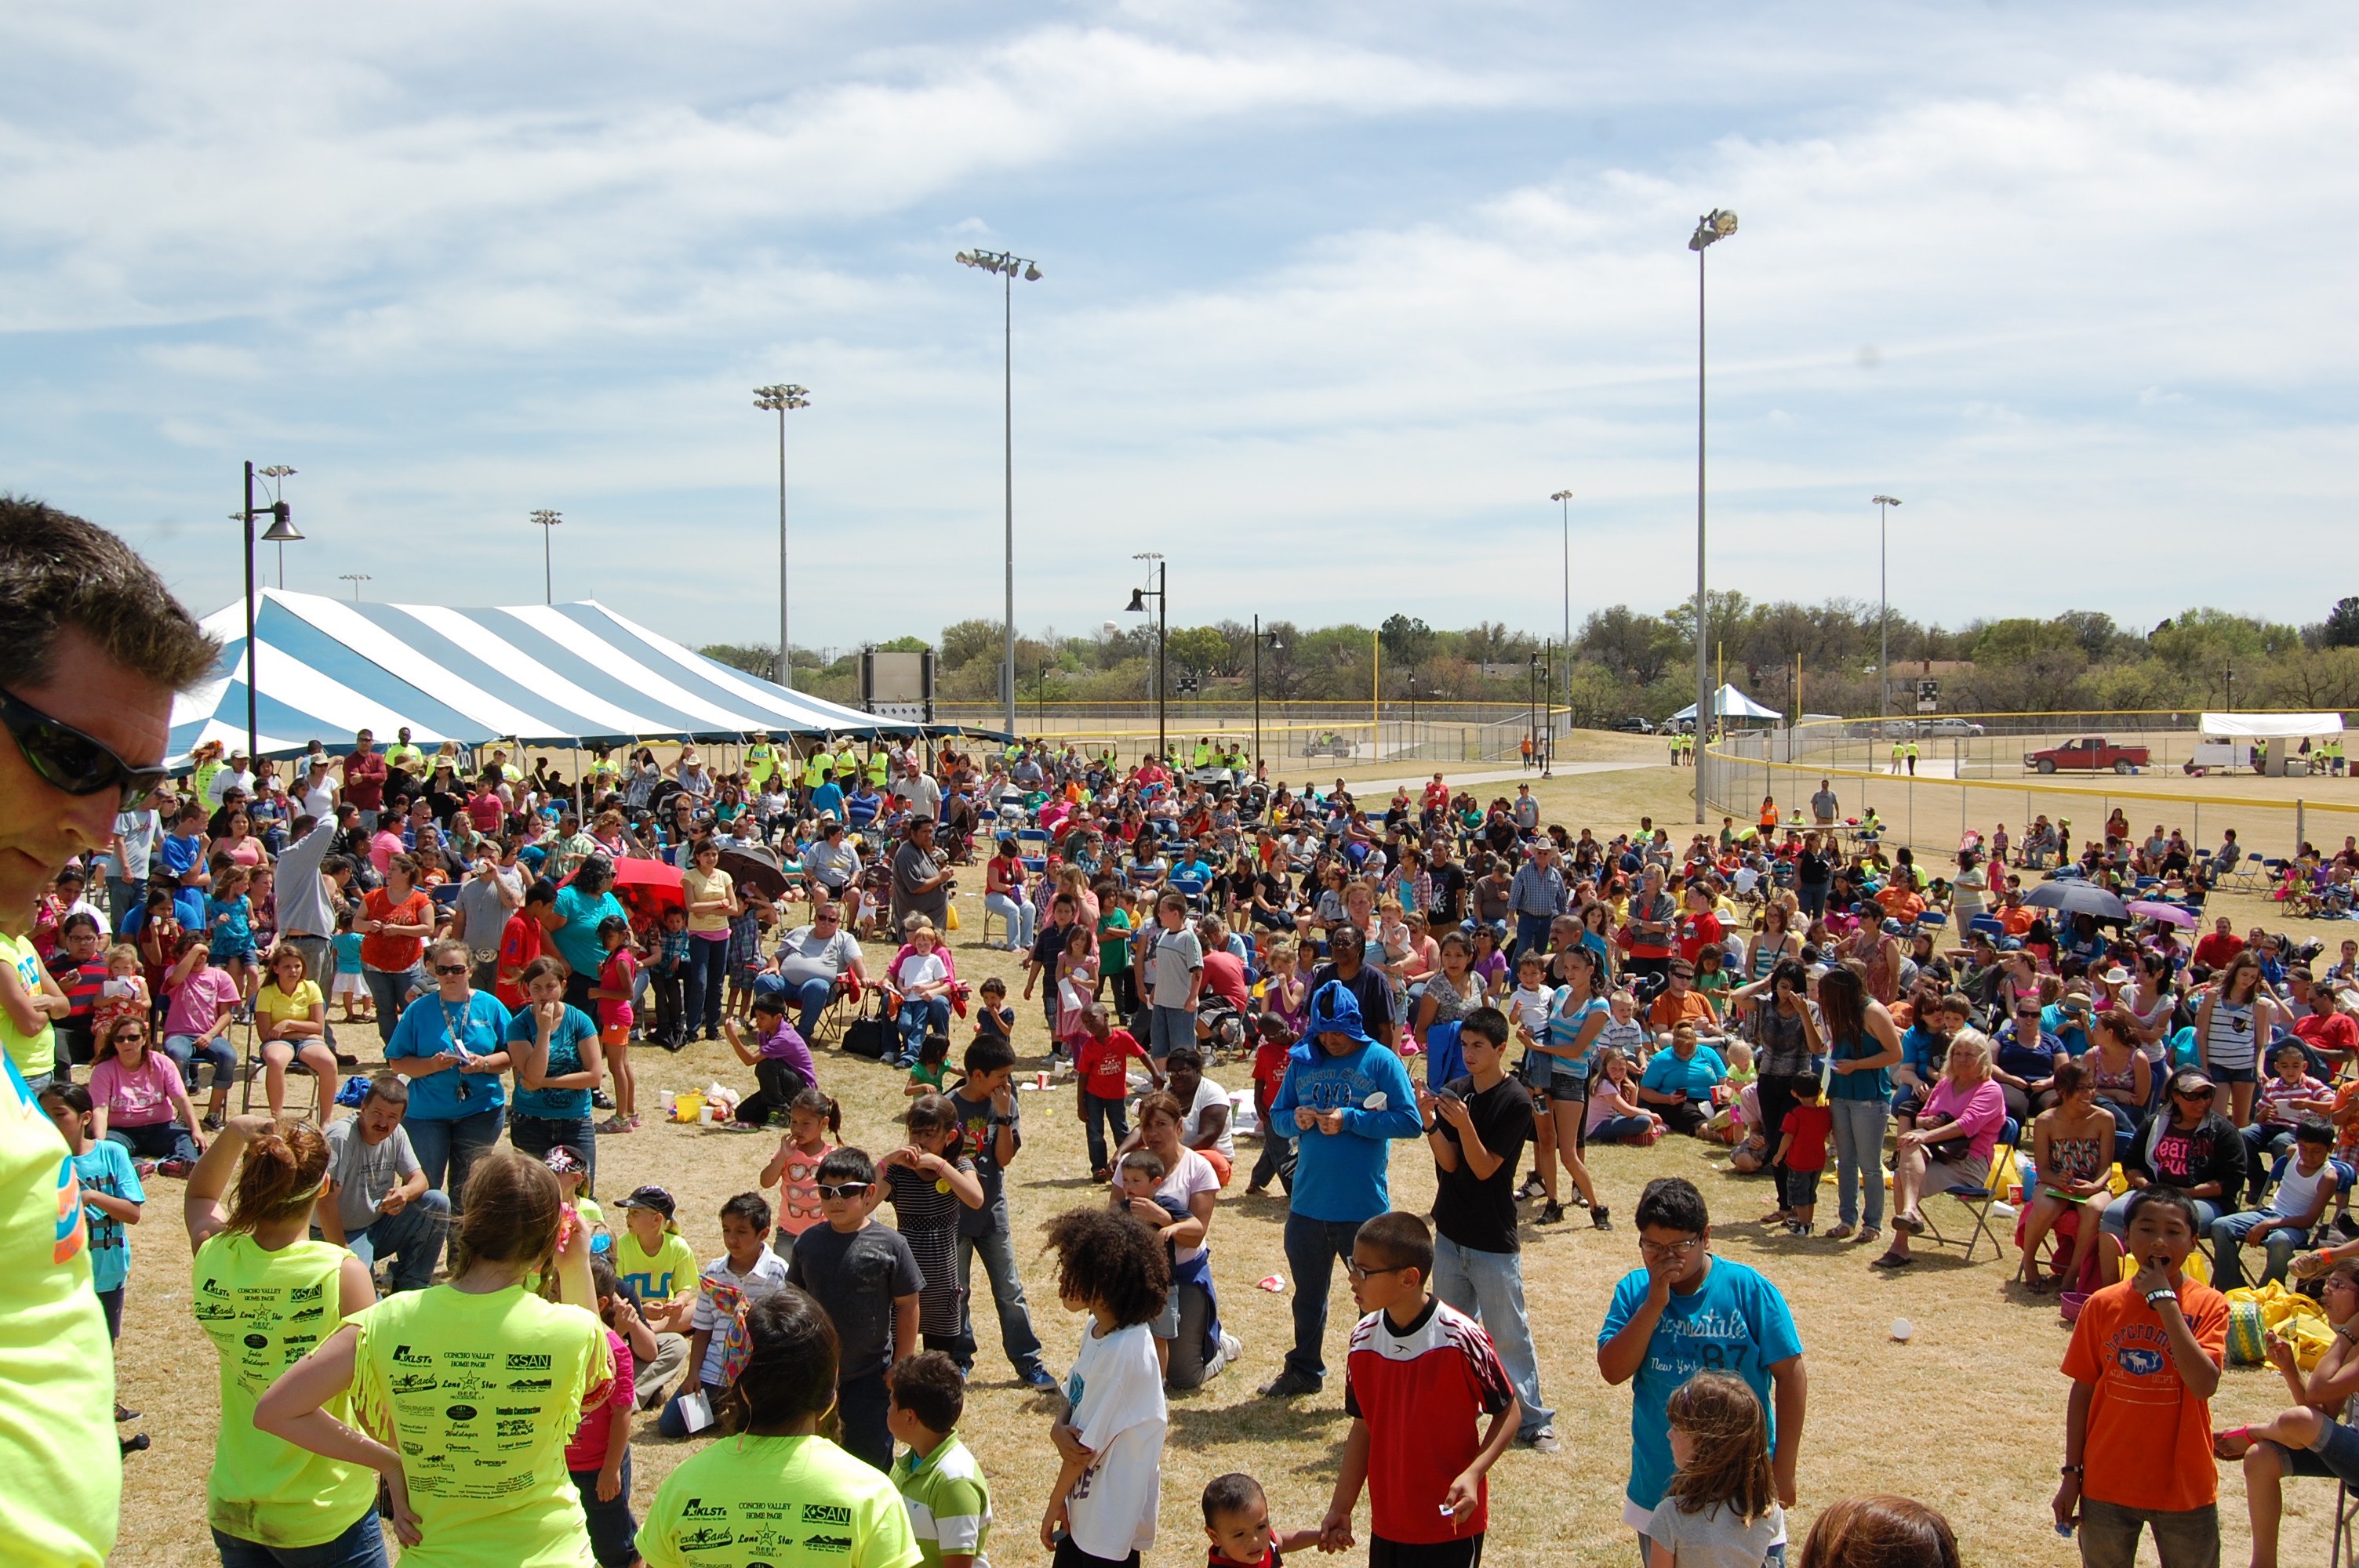 TLC to Host Texas' 16th Annual Largest Easter Egg Hunt